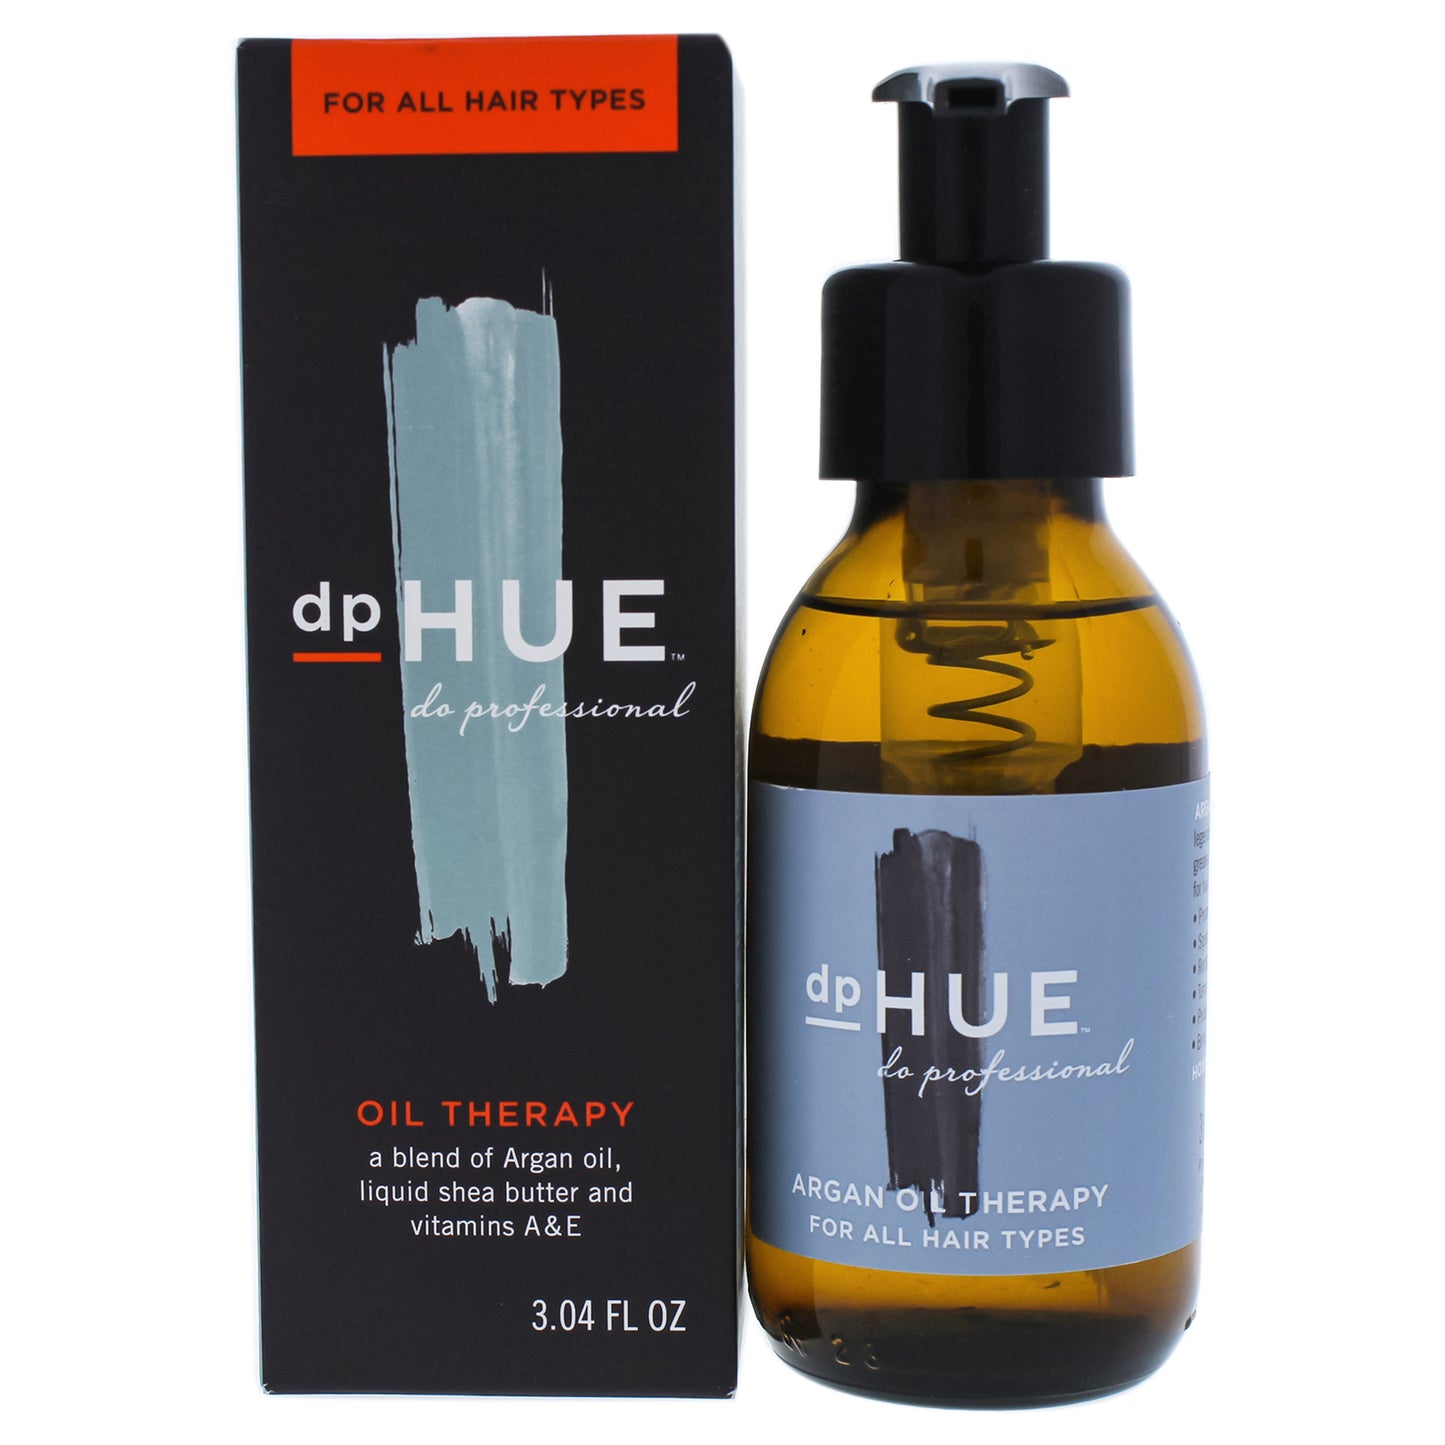 dpHUE Color Fresh Oil Therapy